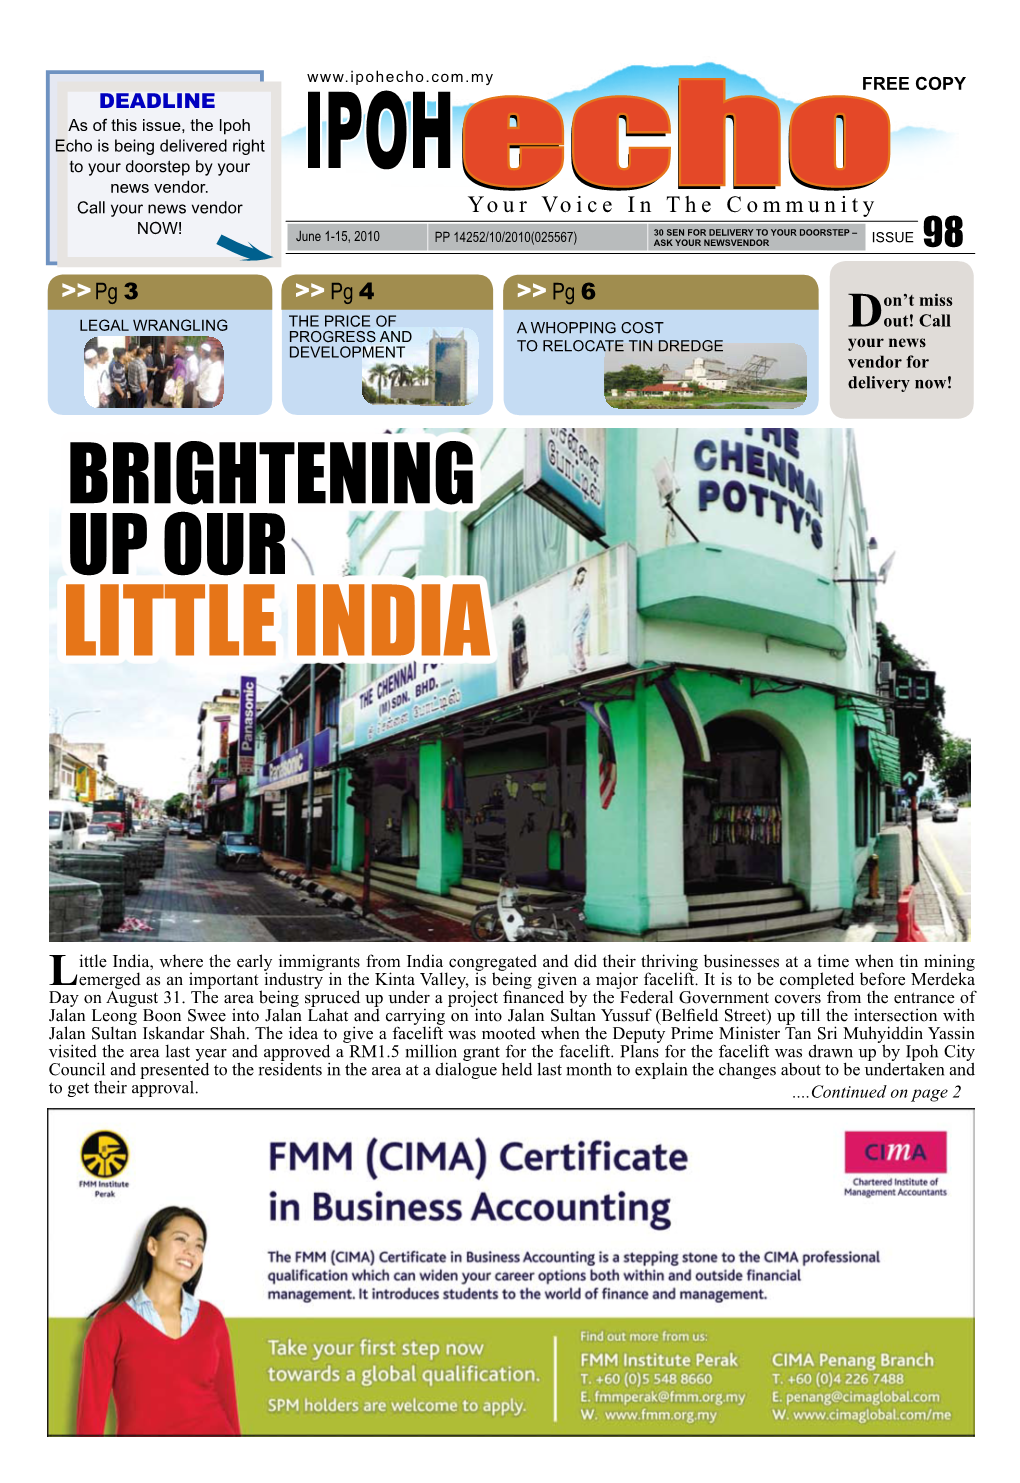 Brightening up Our Little India